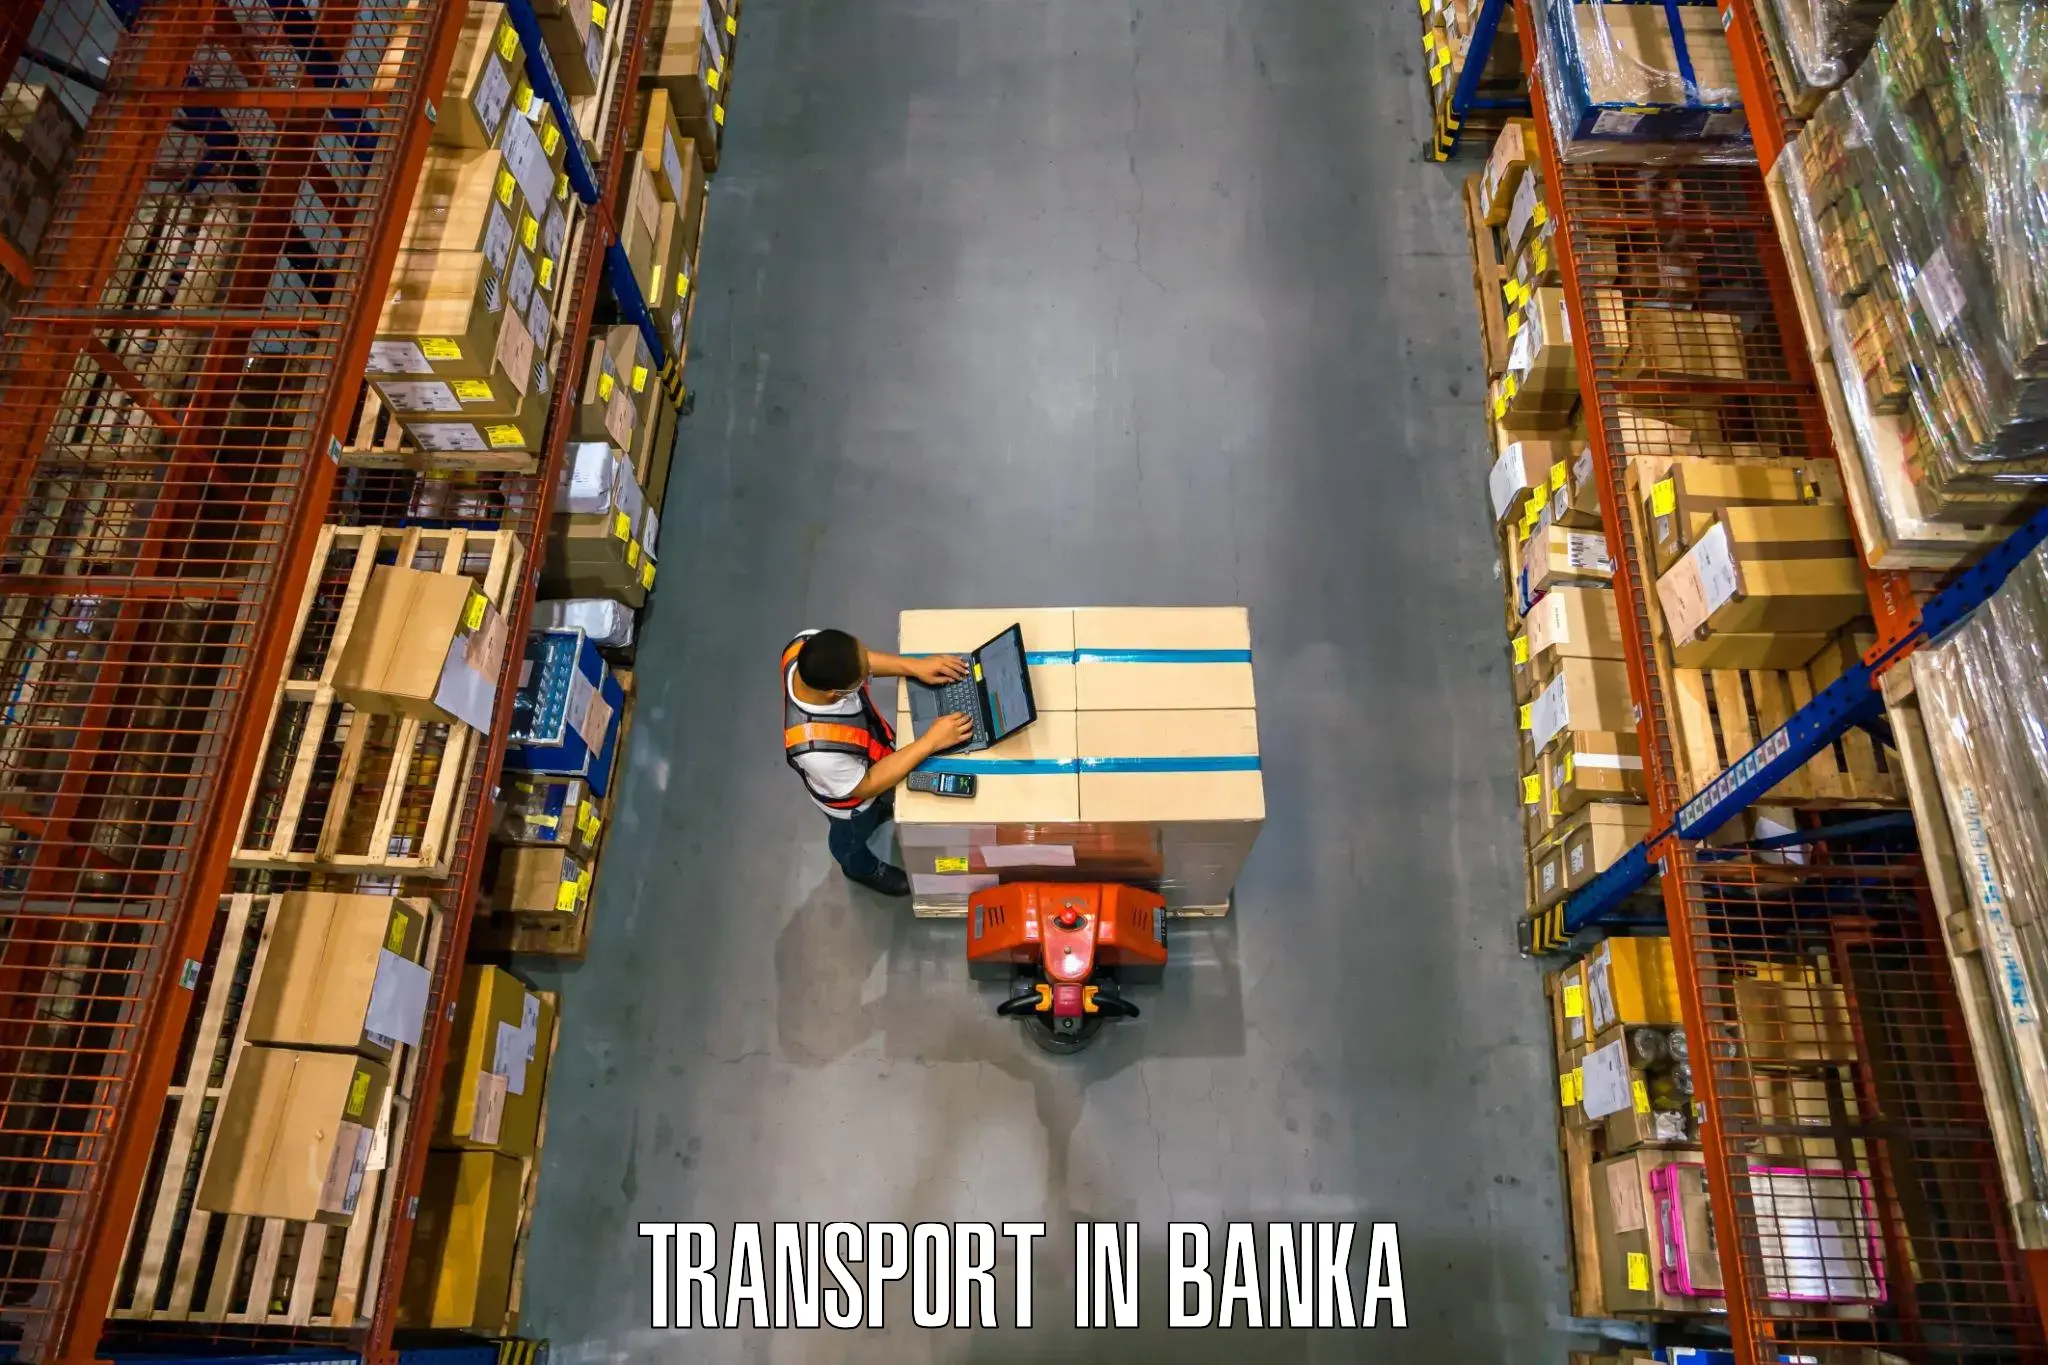 Express transport services in Banka